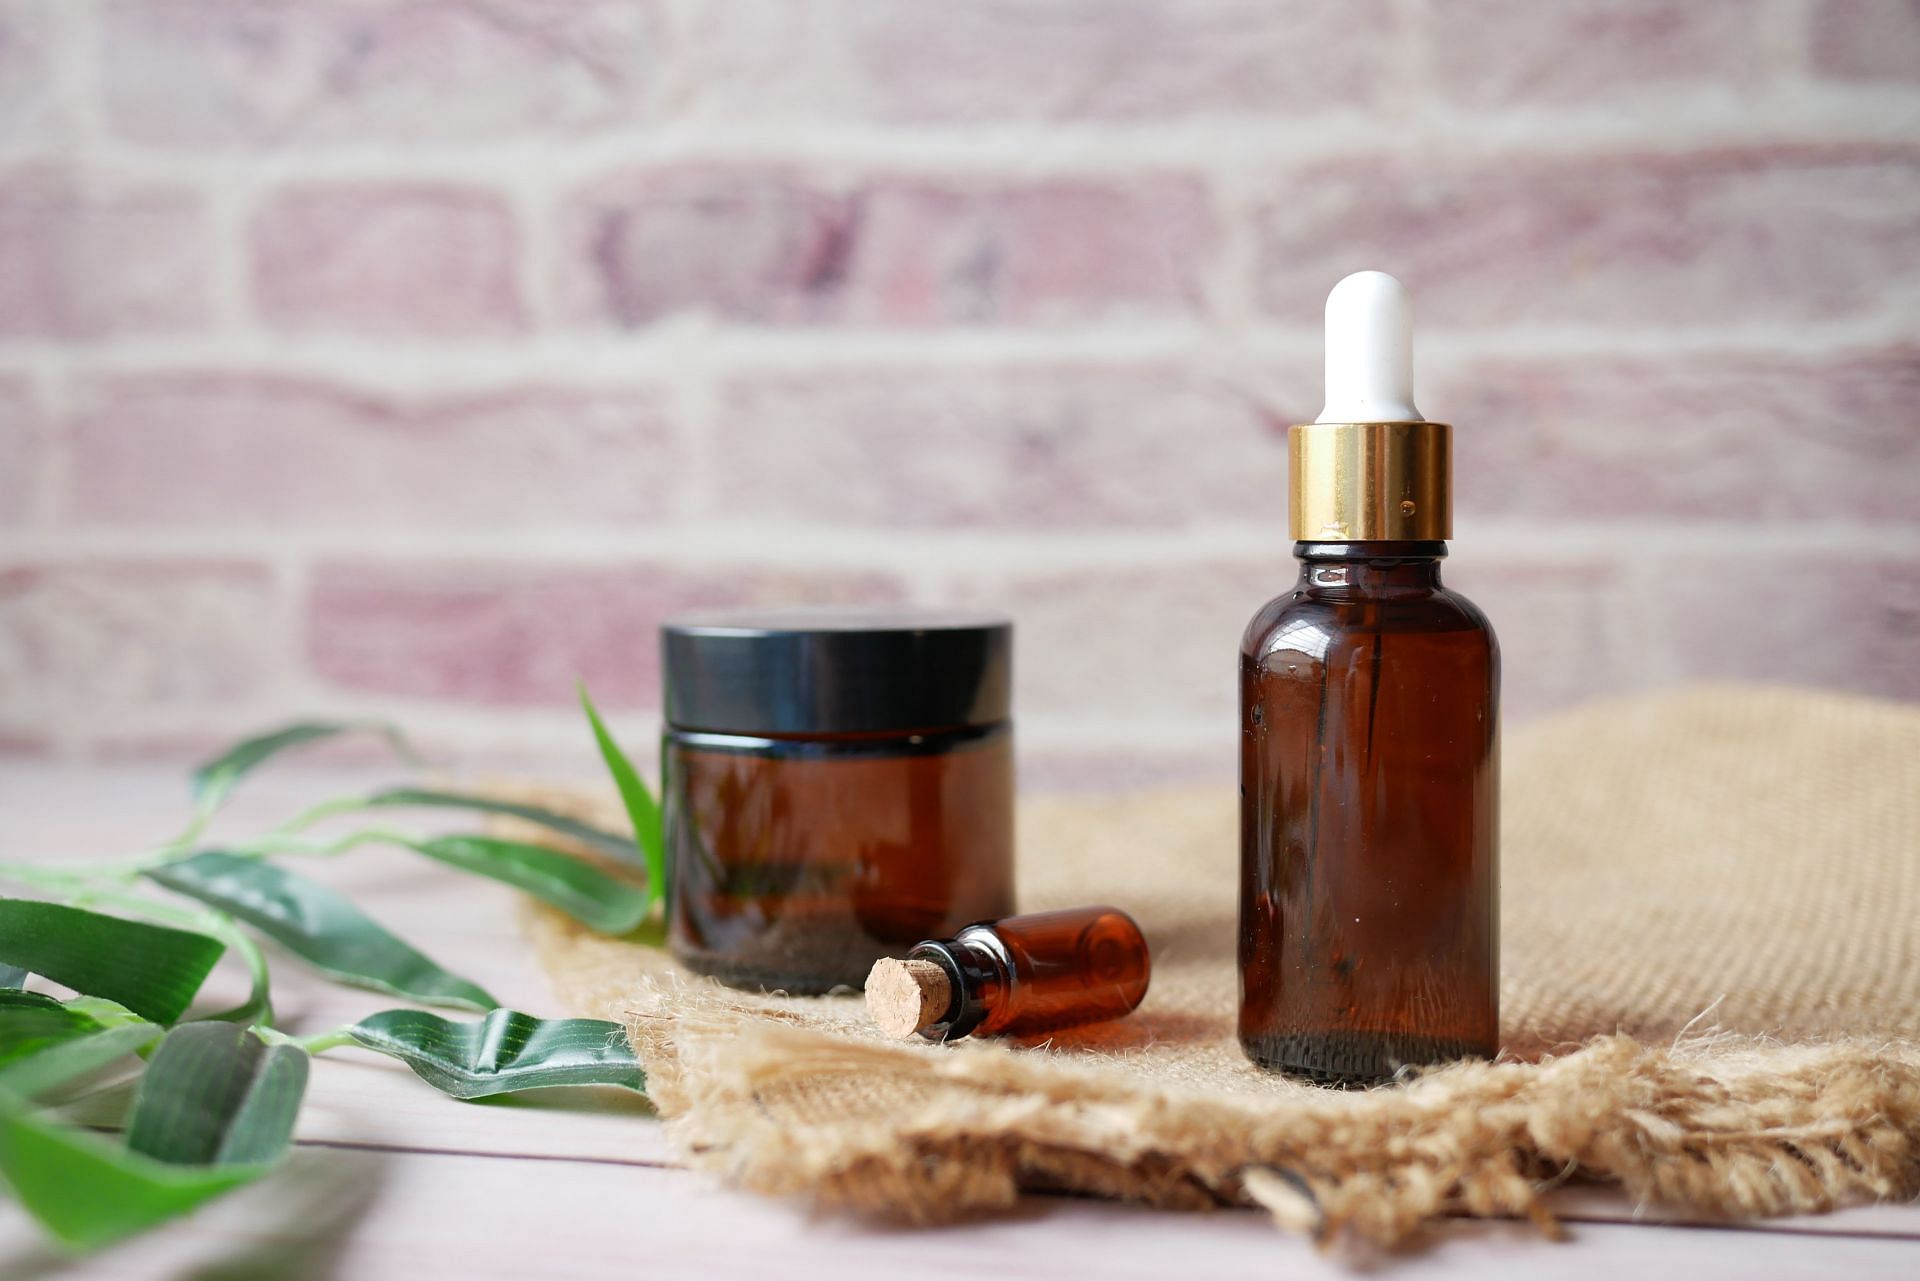 Using tea tree oil for your skin has various benefits, here are some of our favorites! (image via unsplash/Towfiqu Barbhuiya)